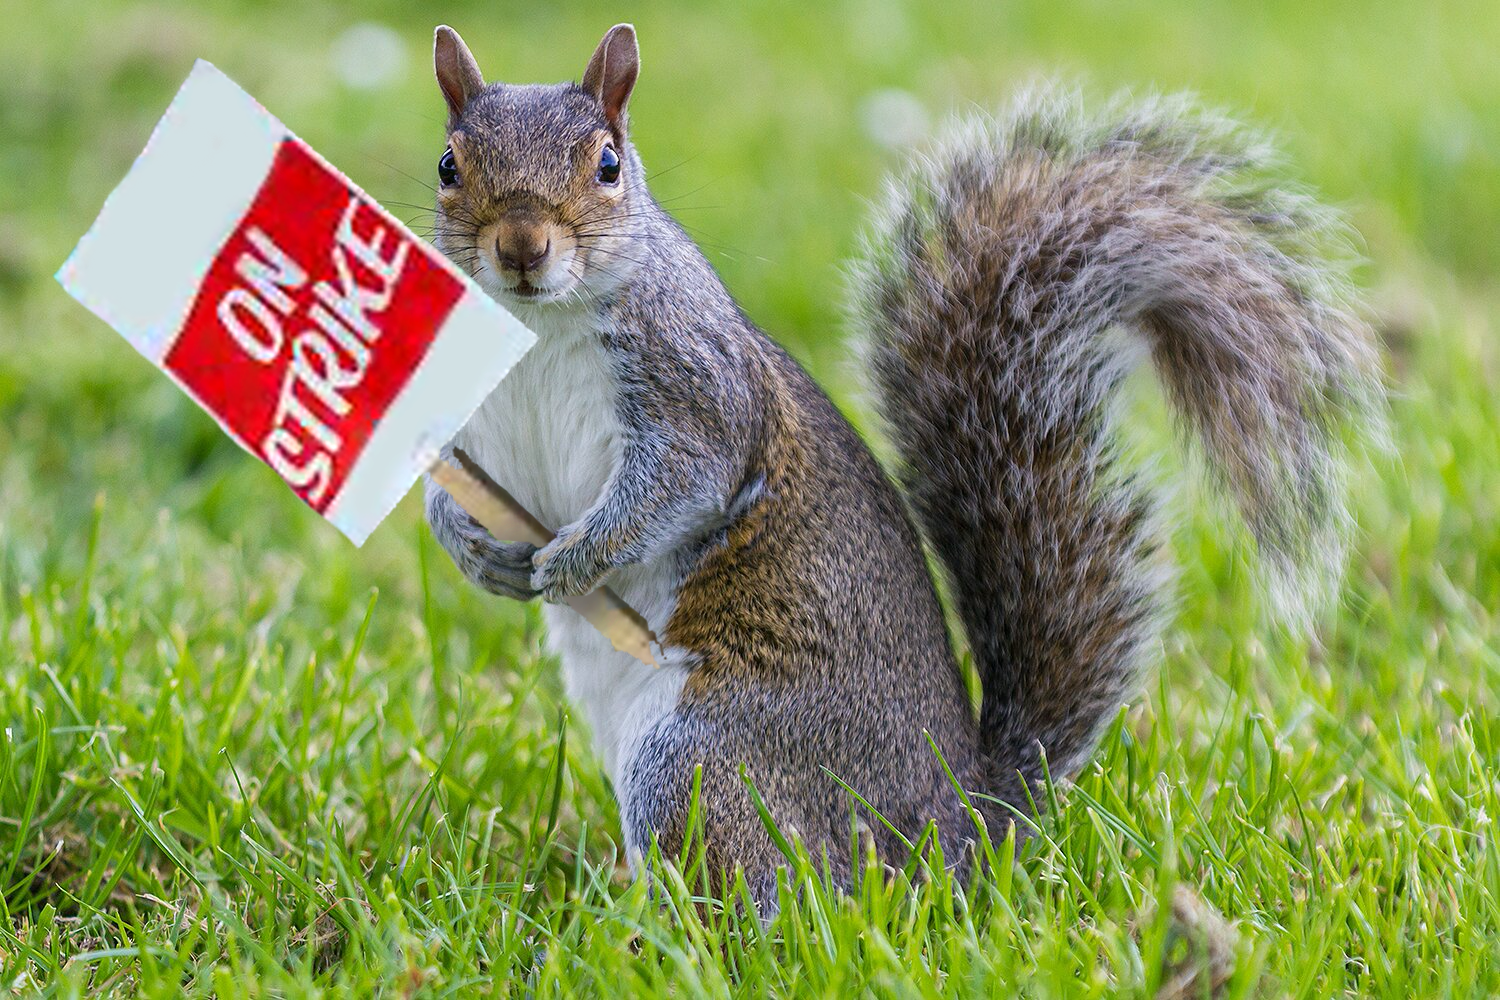 a squirrel holding a sign that says "on strike"